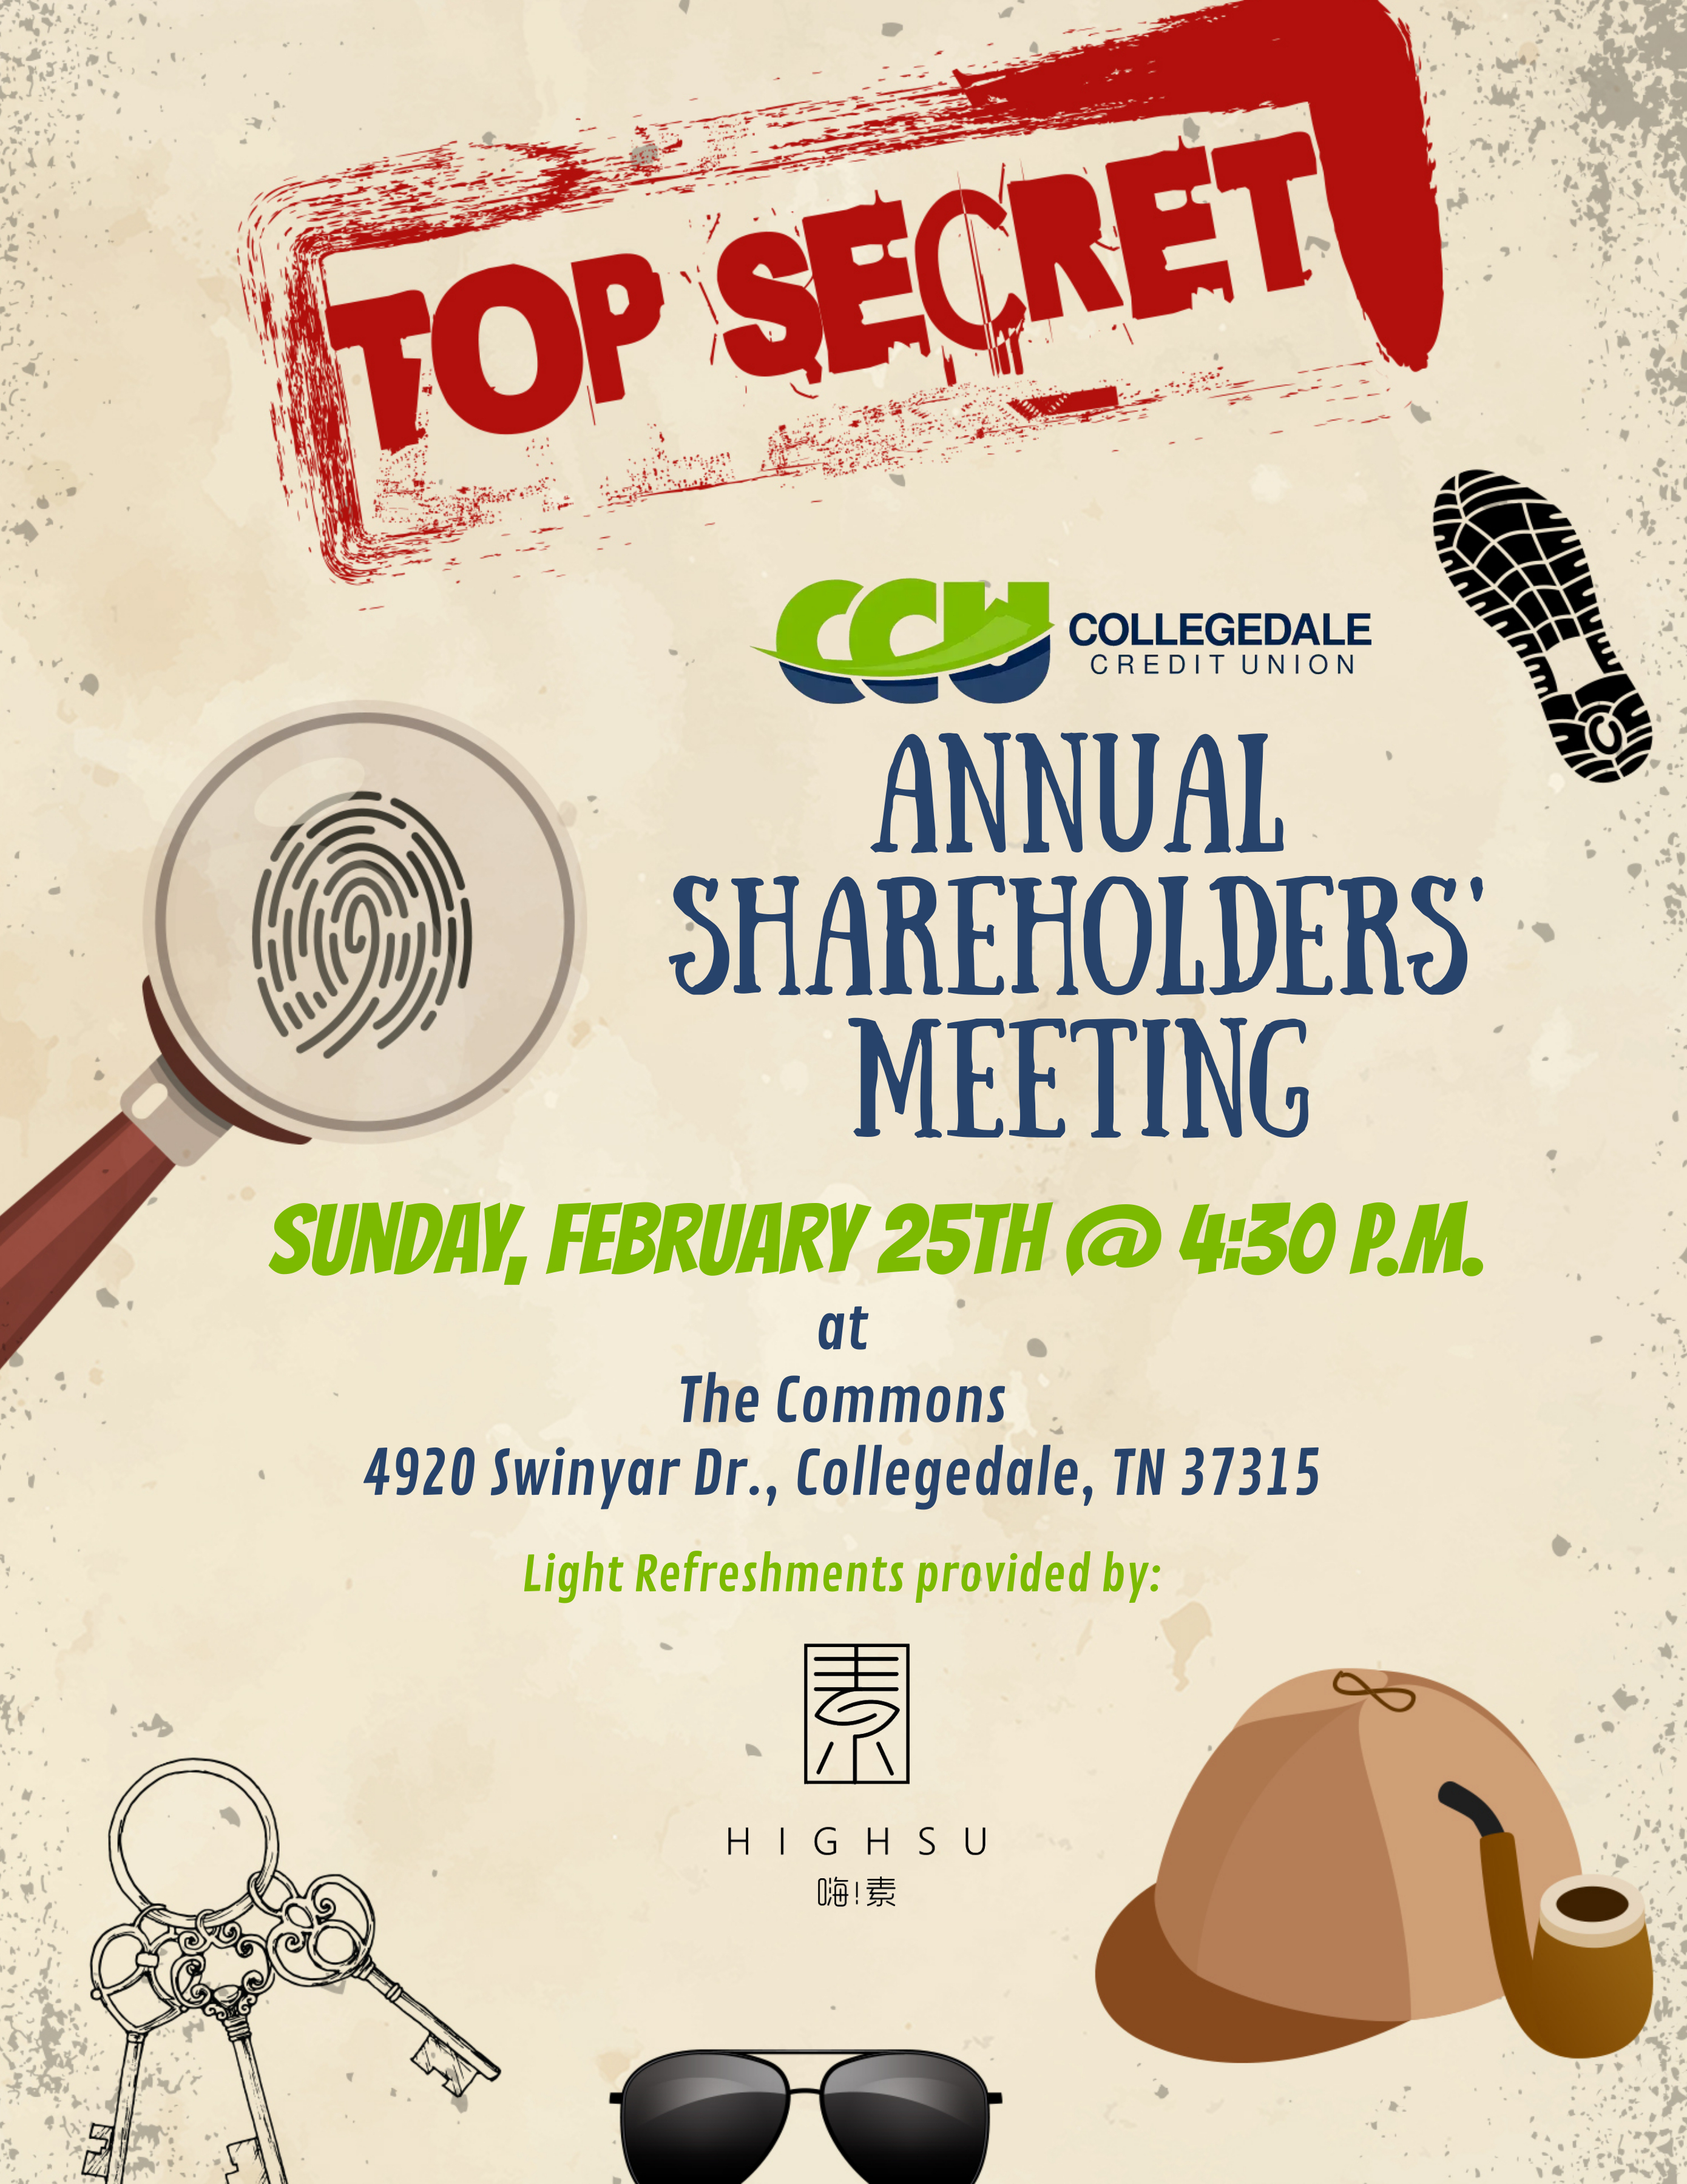 Image looks like a crime scene file with a magnifying glass over a thumbprint on the left and the right side has a shoe print with a Top Secret stamp at top at the bottom are keys, black sunglasses, and a brown baseball cap and pipe.  Text says Collegedale CU Annual Shareholders Meeting Sunday, February 25th @ 4:30pm at The Commons 4920 Swinyar Dr, Collegedale TN.  Light refreshments provided by HIGHSU.